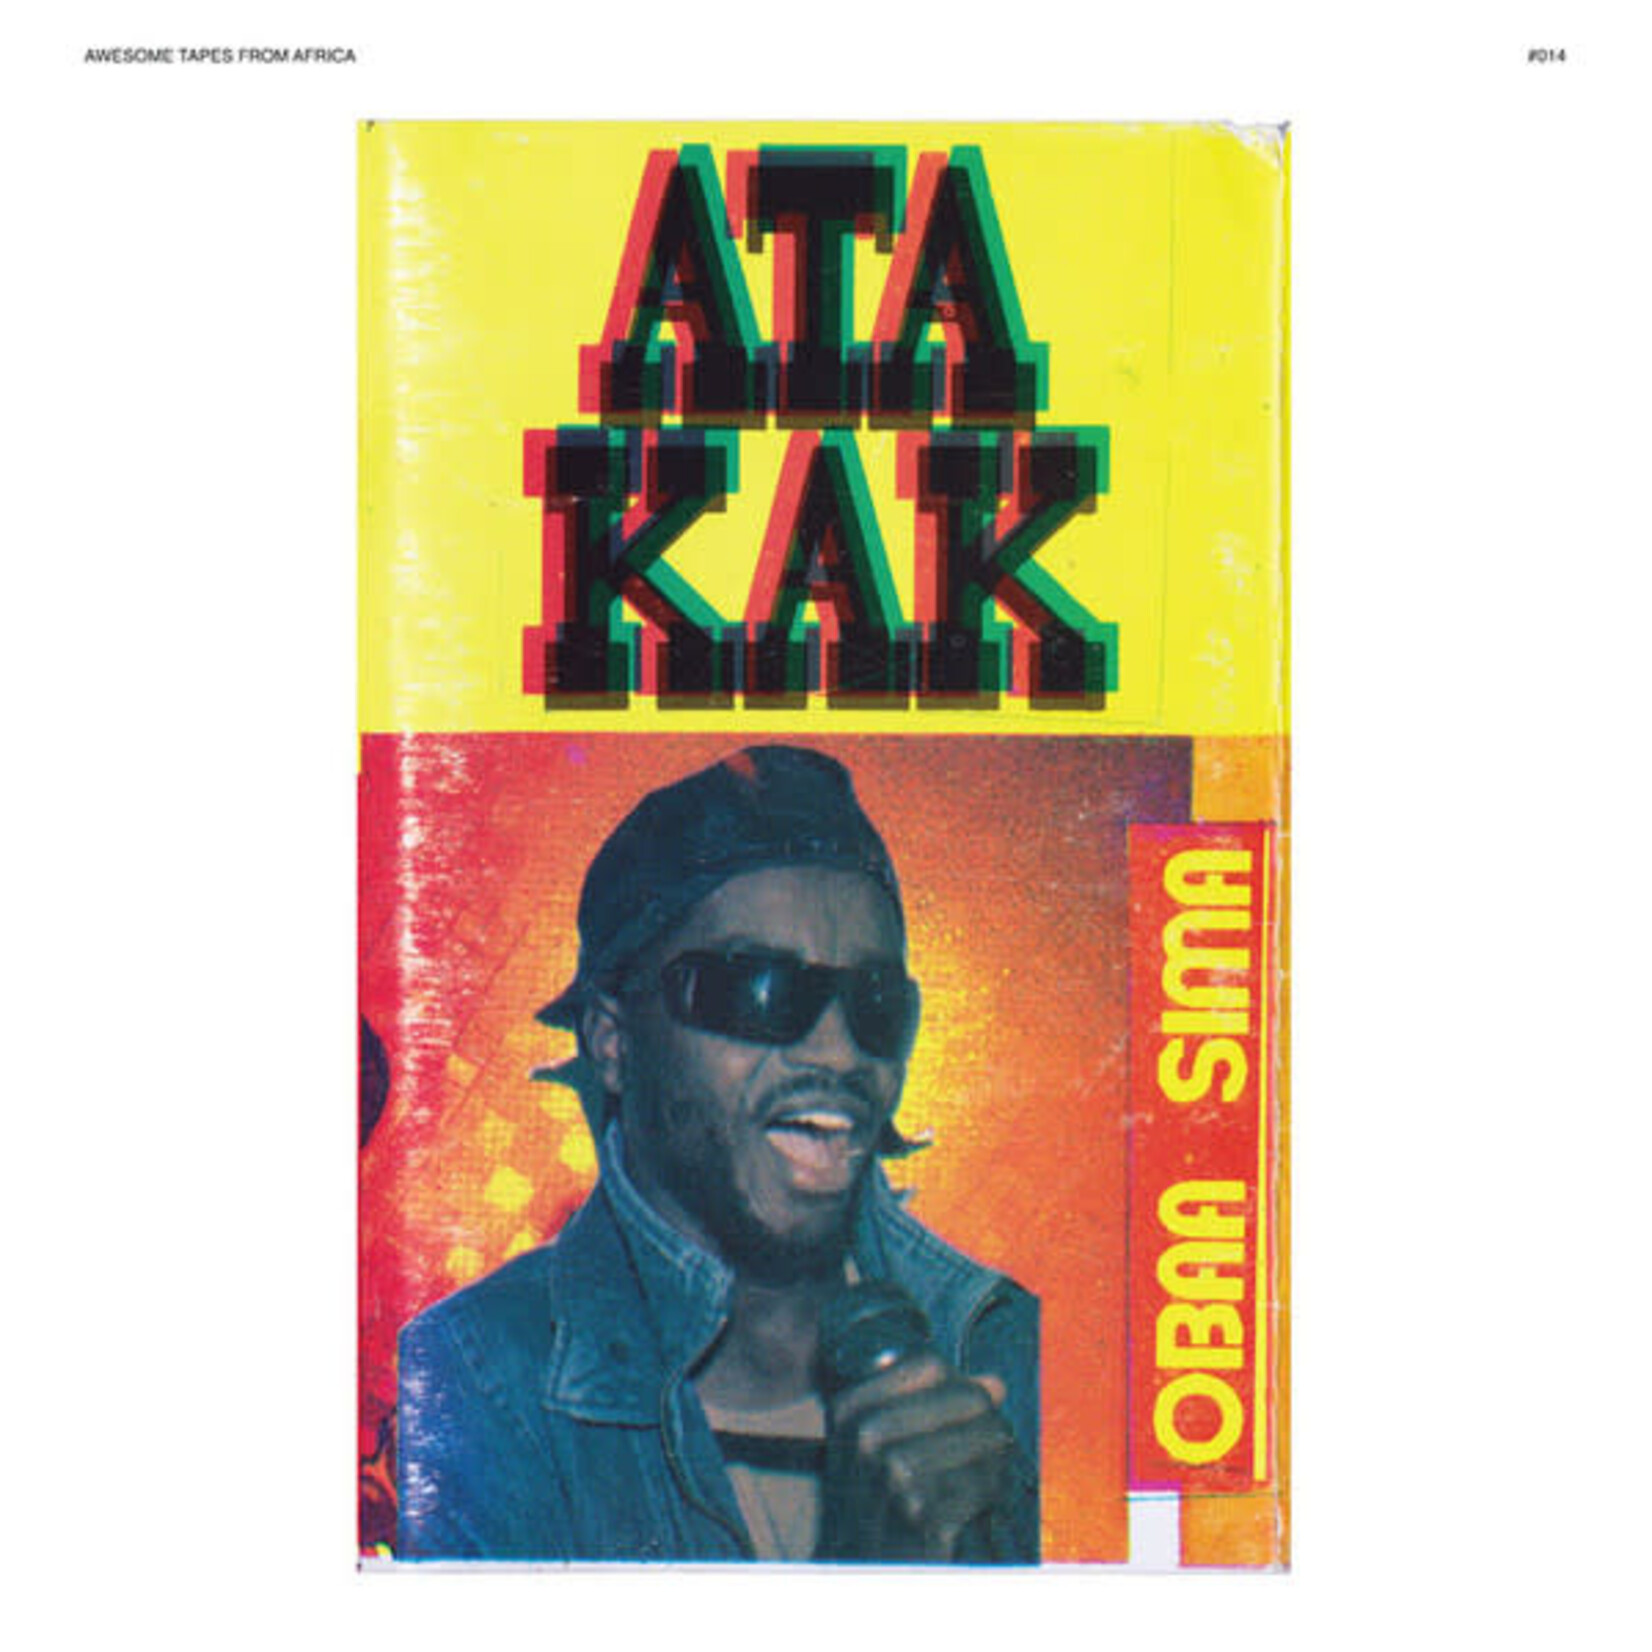 ATA KAK: Obaa Sima [AWESOME TAPES FROM AFRICA]